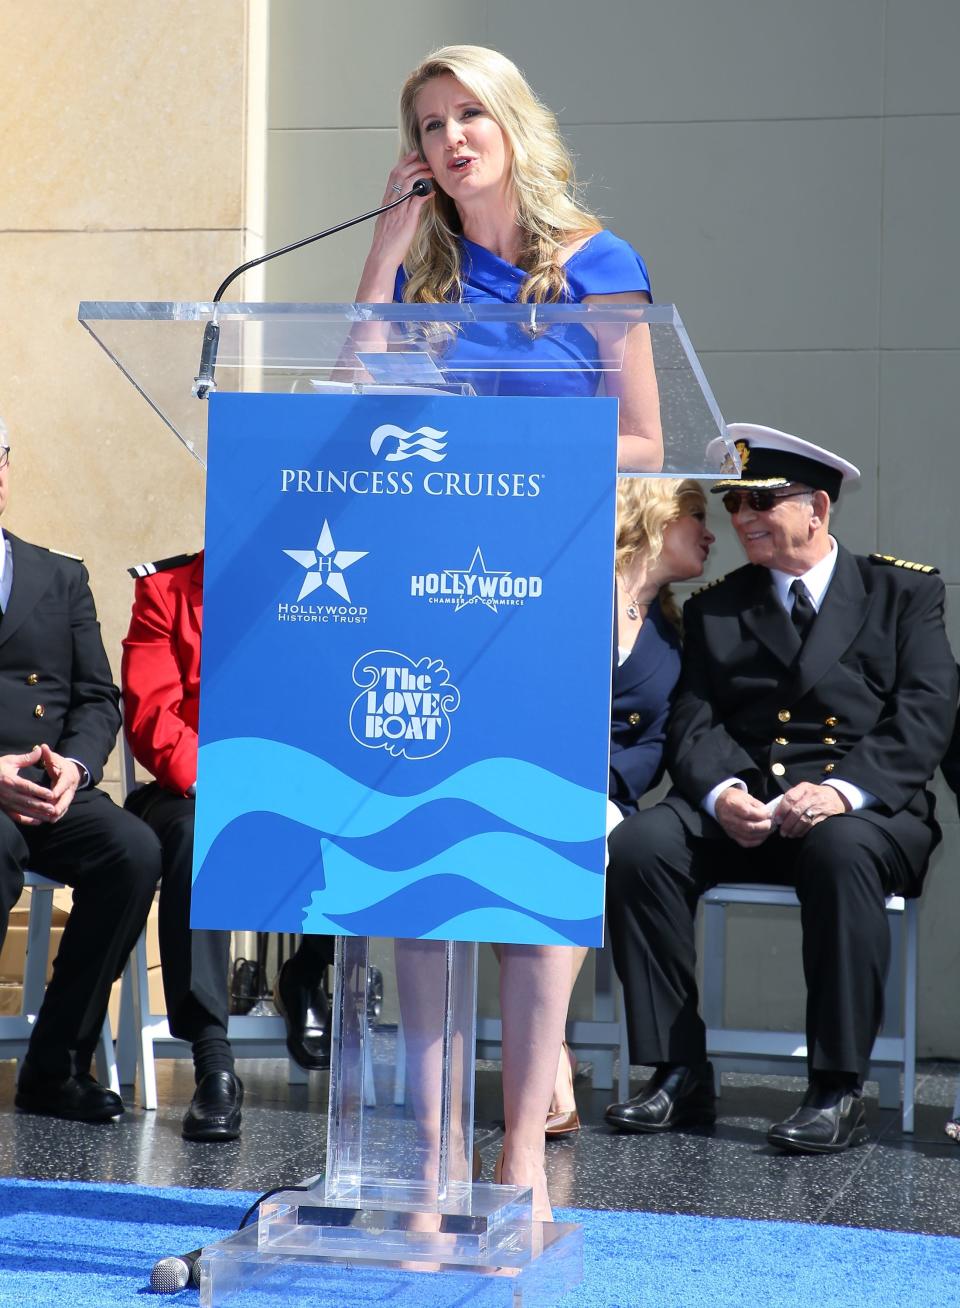 Jan Swartz, president of Princess Cruises, attends a ceremony honoring the "The Love Boat" with the Hollywood Walk Of Fame Honorary Star Plaque on May 10, 2018 in Hollywood, California.